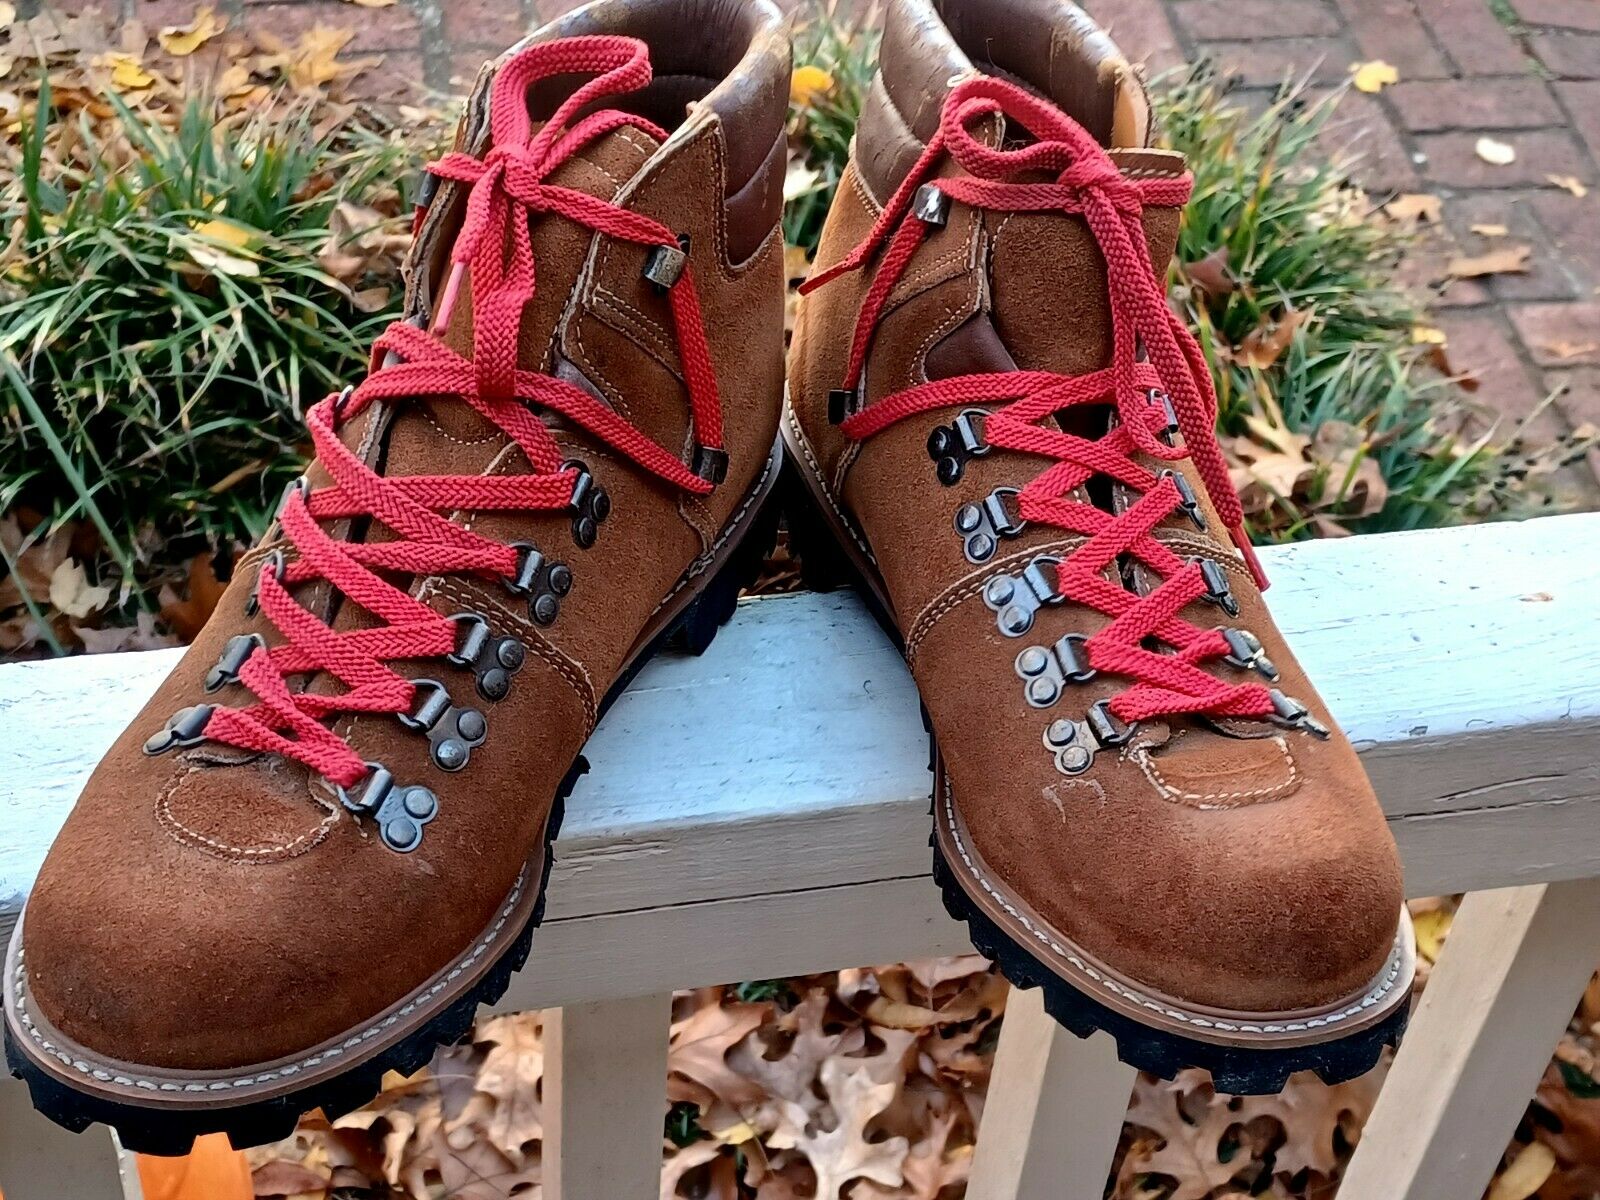 VTG St Johns Bay Brown Suede Mountaineering Hiking Trail Boots Mens Sz 13 D